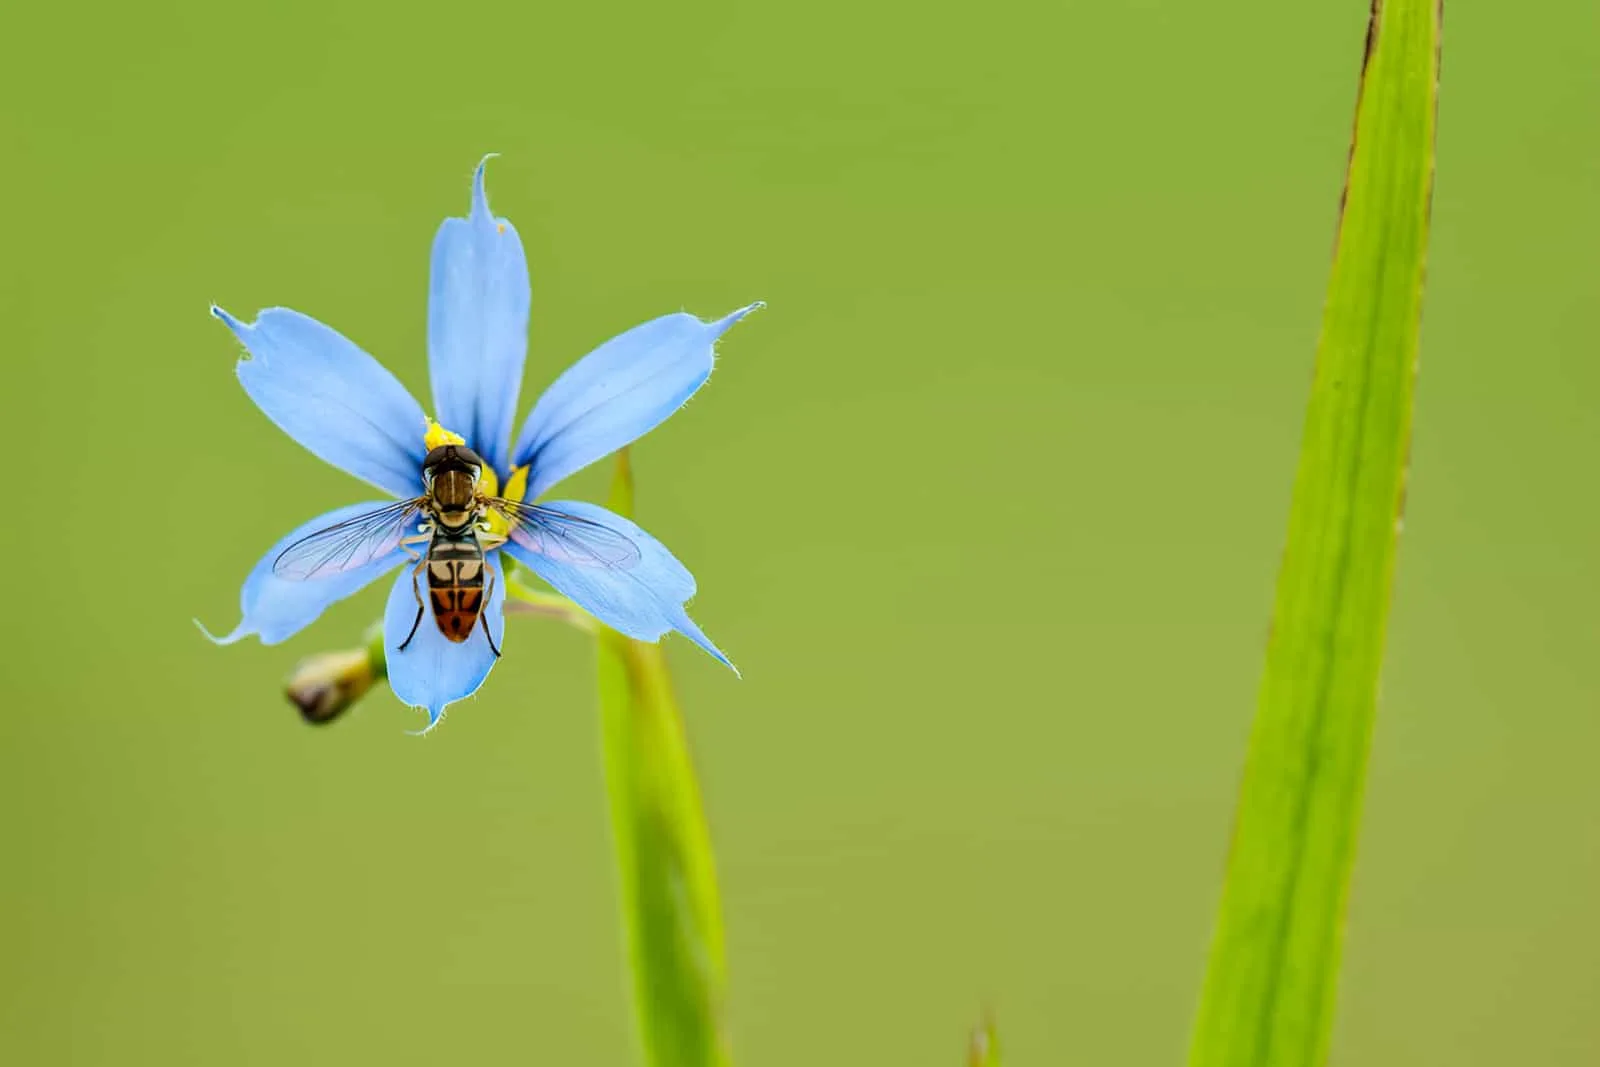 Syrphid fly (fam. Syrphidae) nectaring on blossom of blue-eyed grass